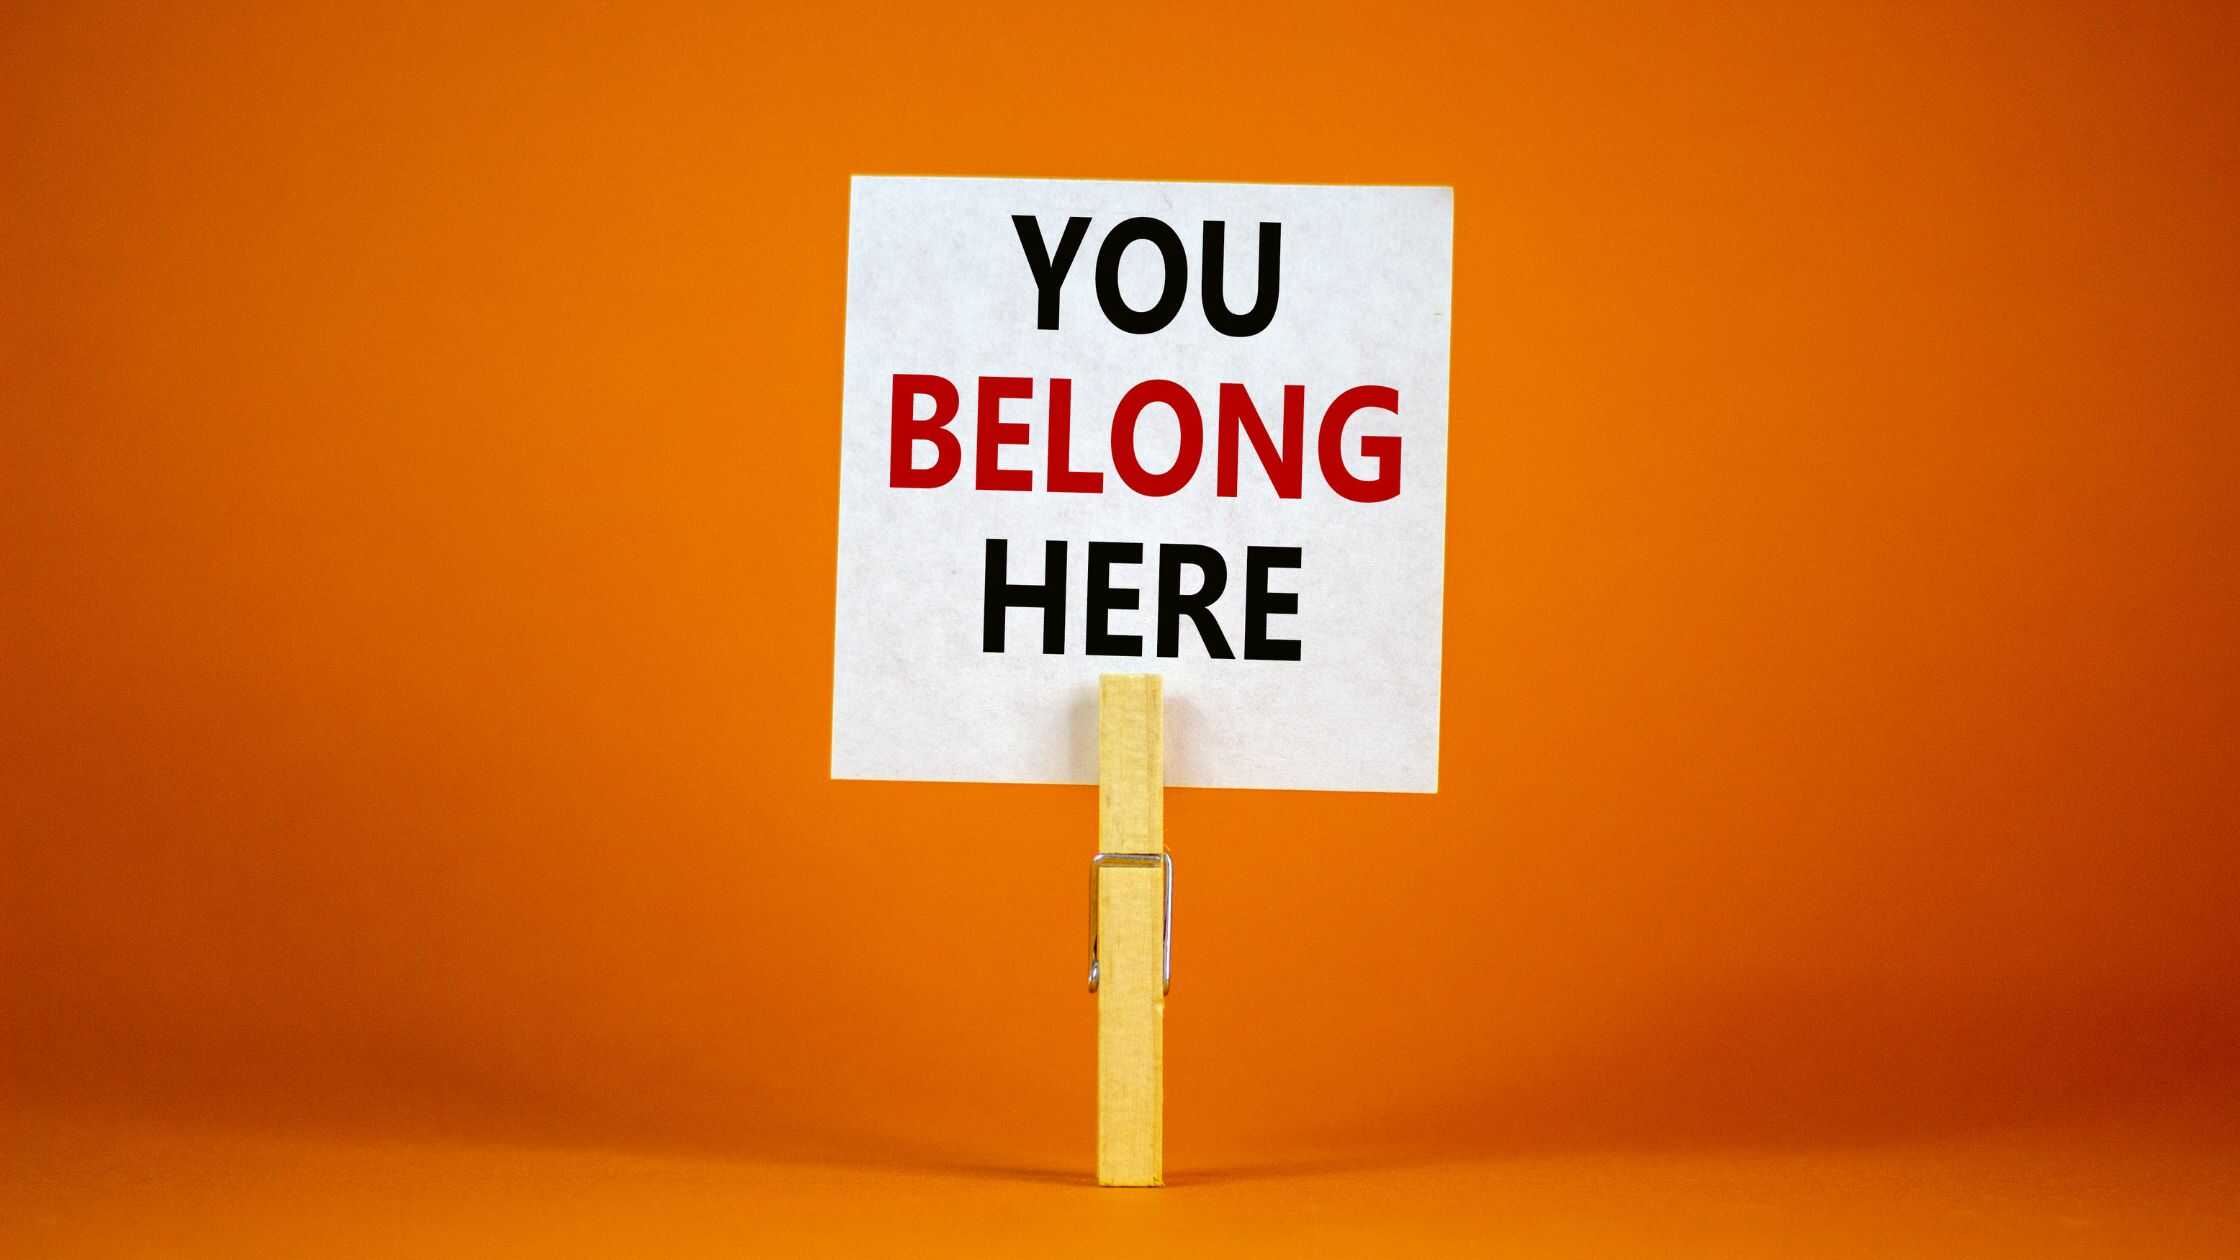 How to build a sense of belonging in the workplace.